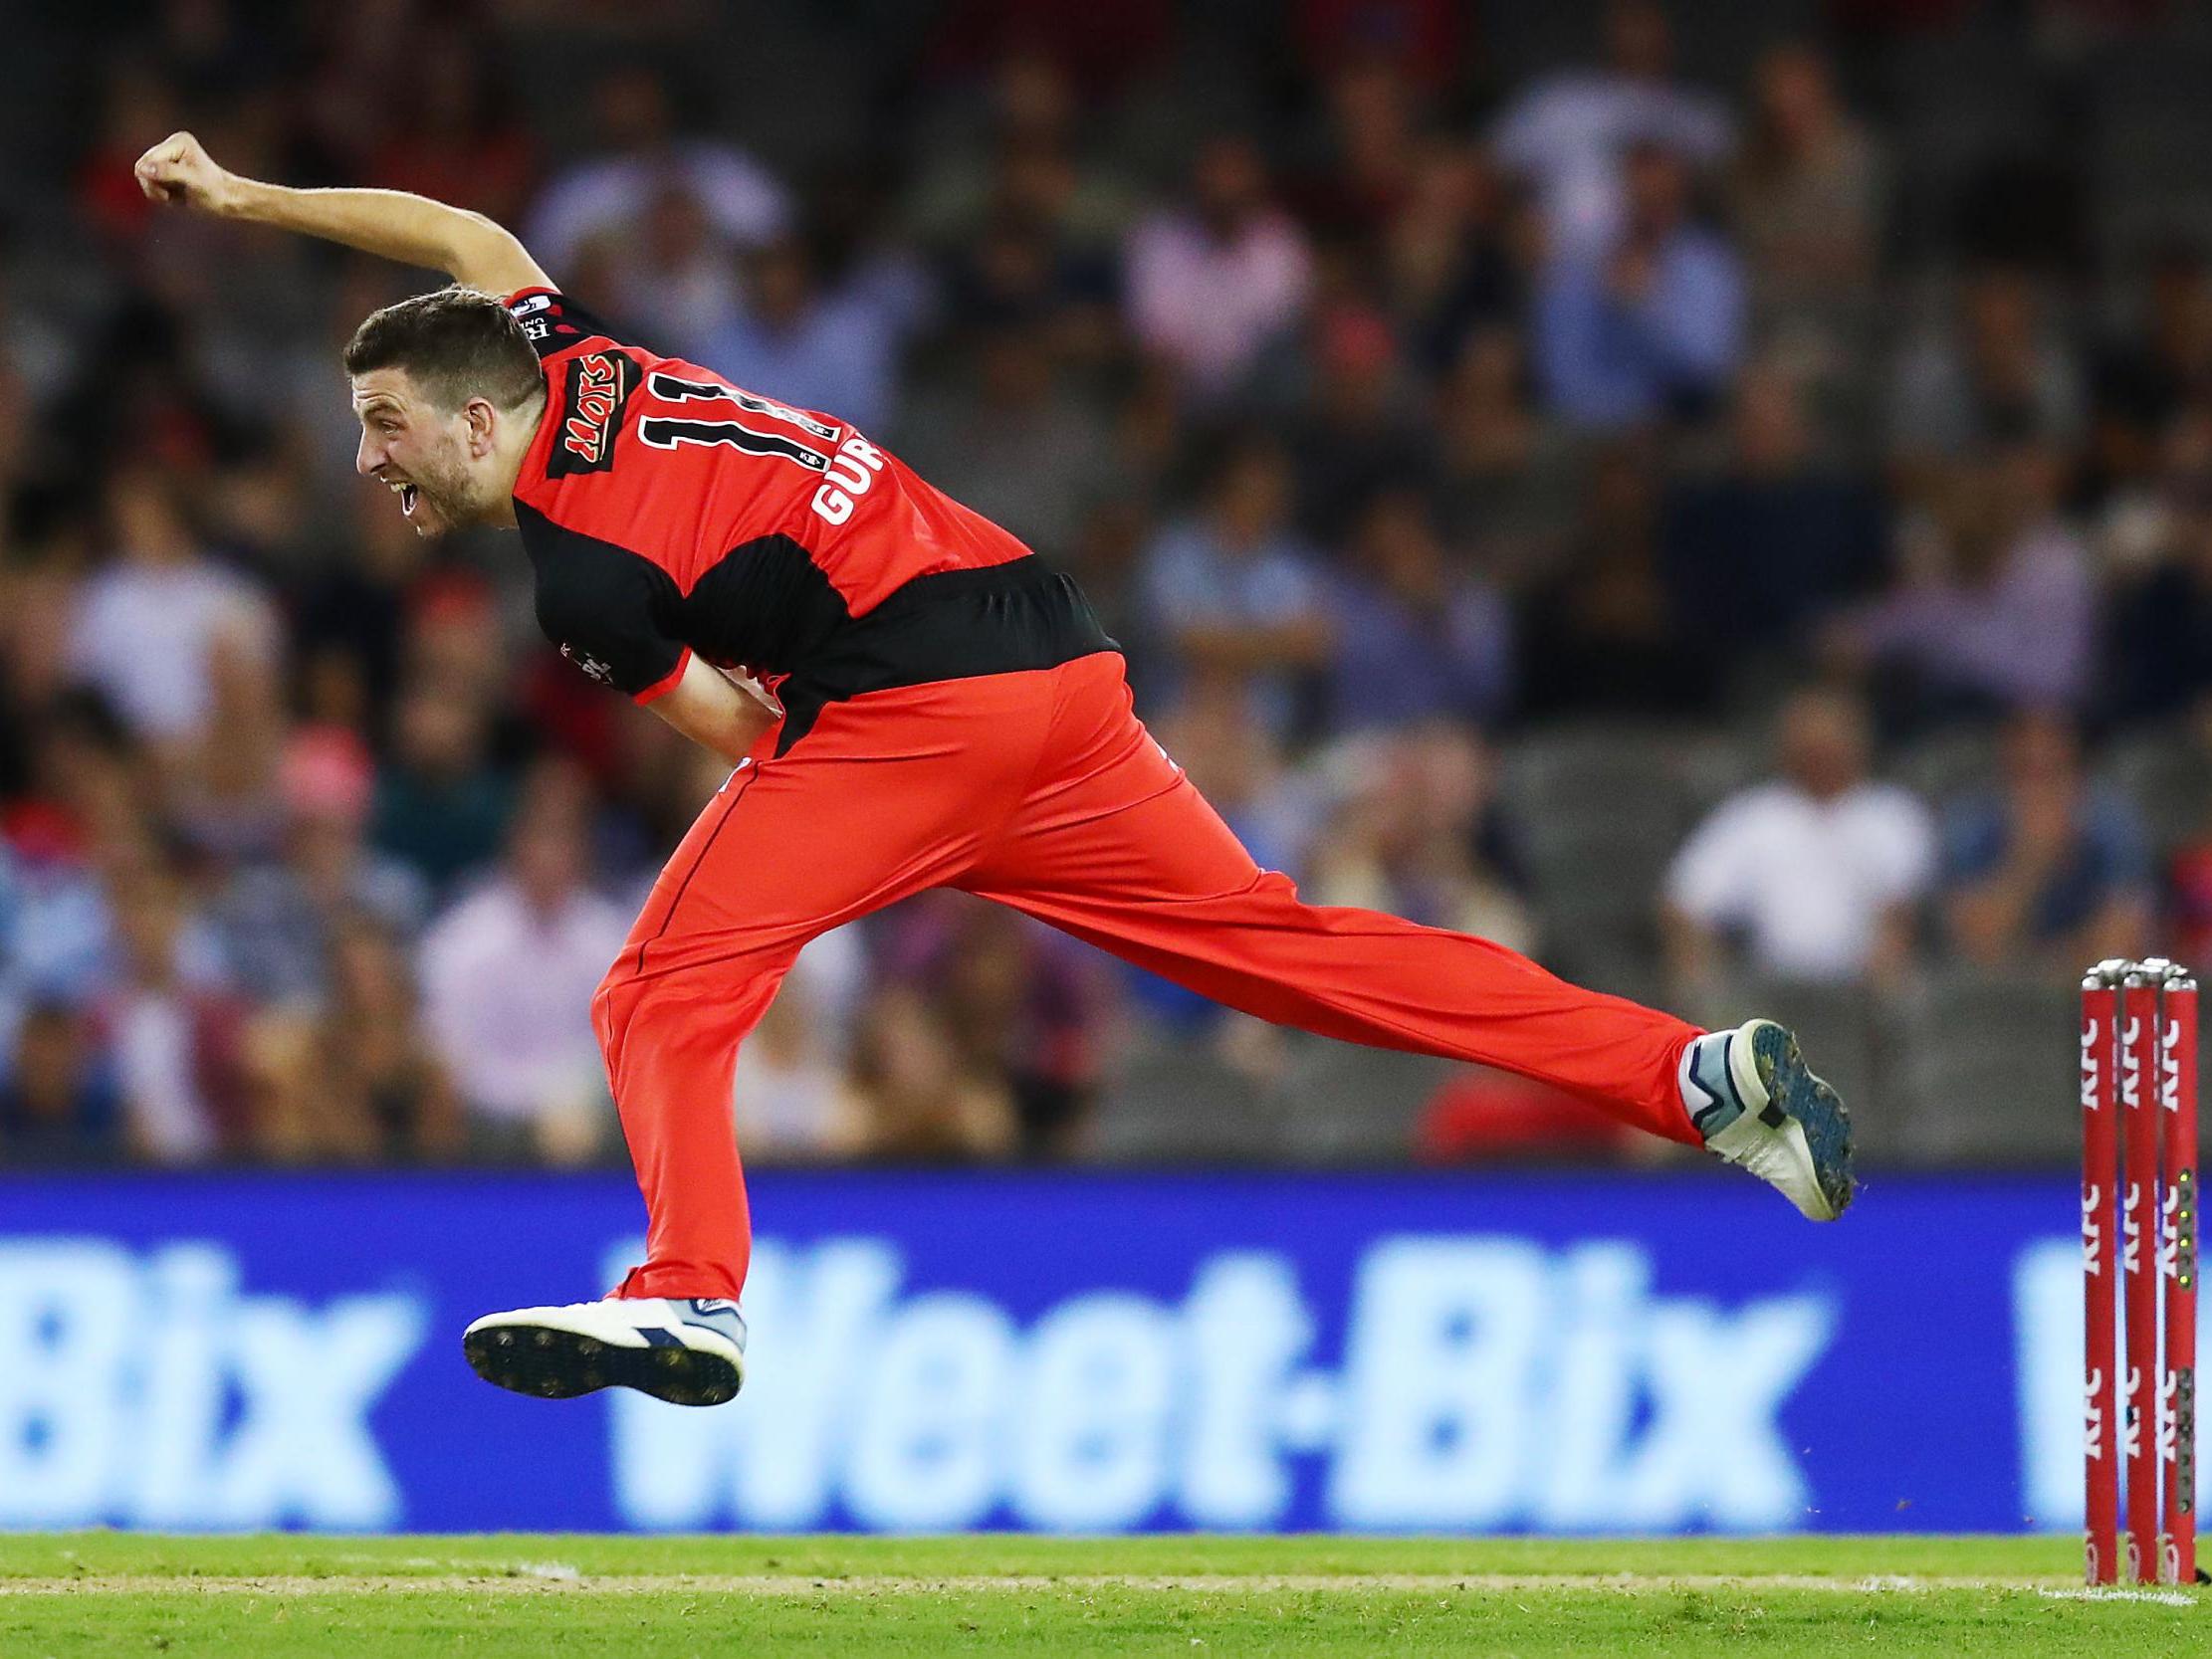 Harry Gurney in action for the Renegades during a Big Bash League match against Sydney Thunder